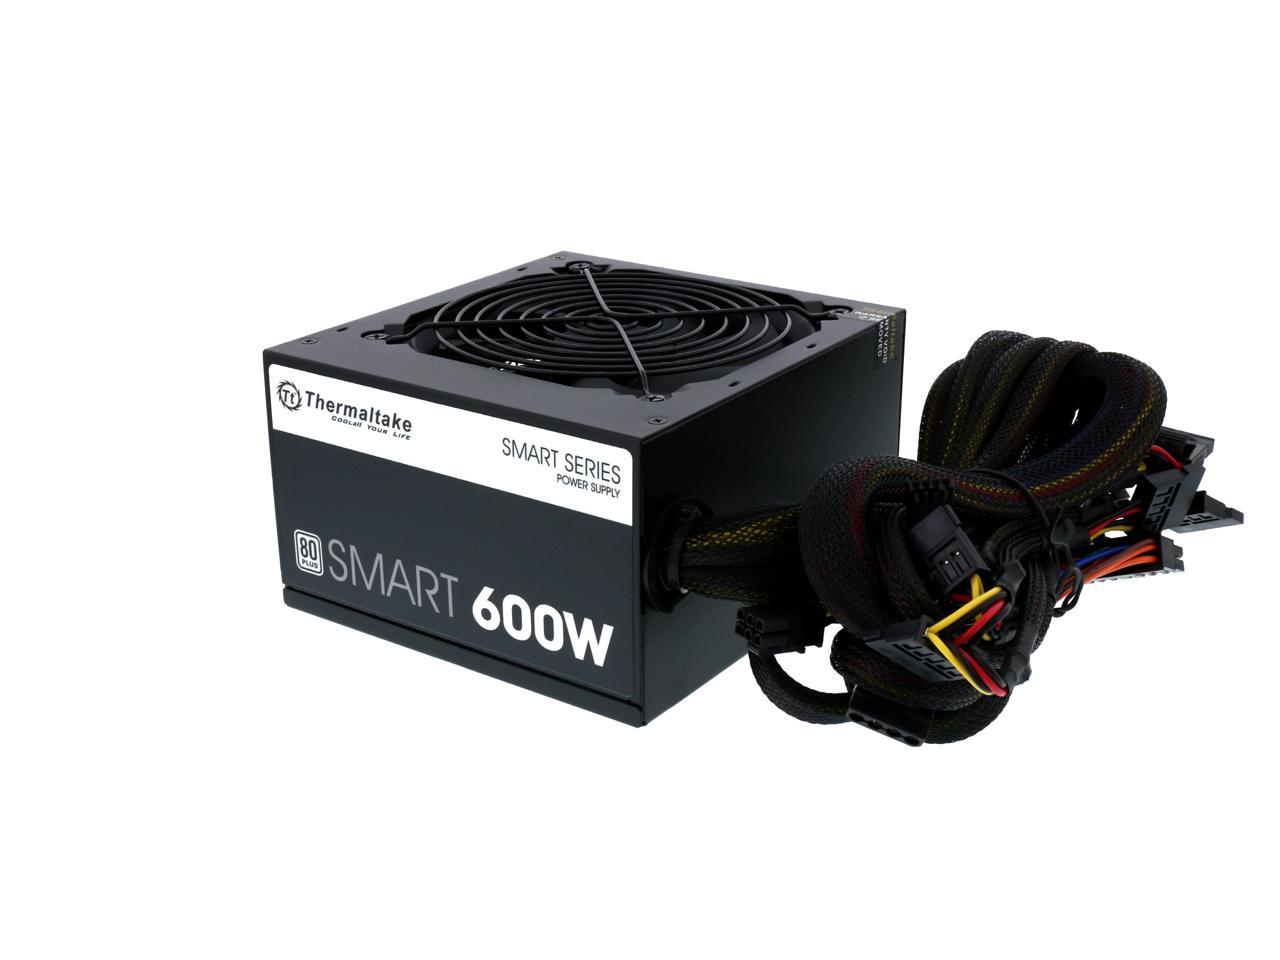 thermaltake-smart-series-600w-sli-crossfire-ready-continuous-power